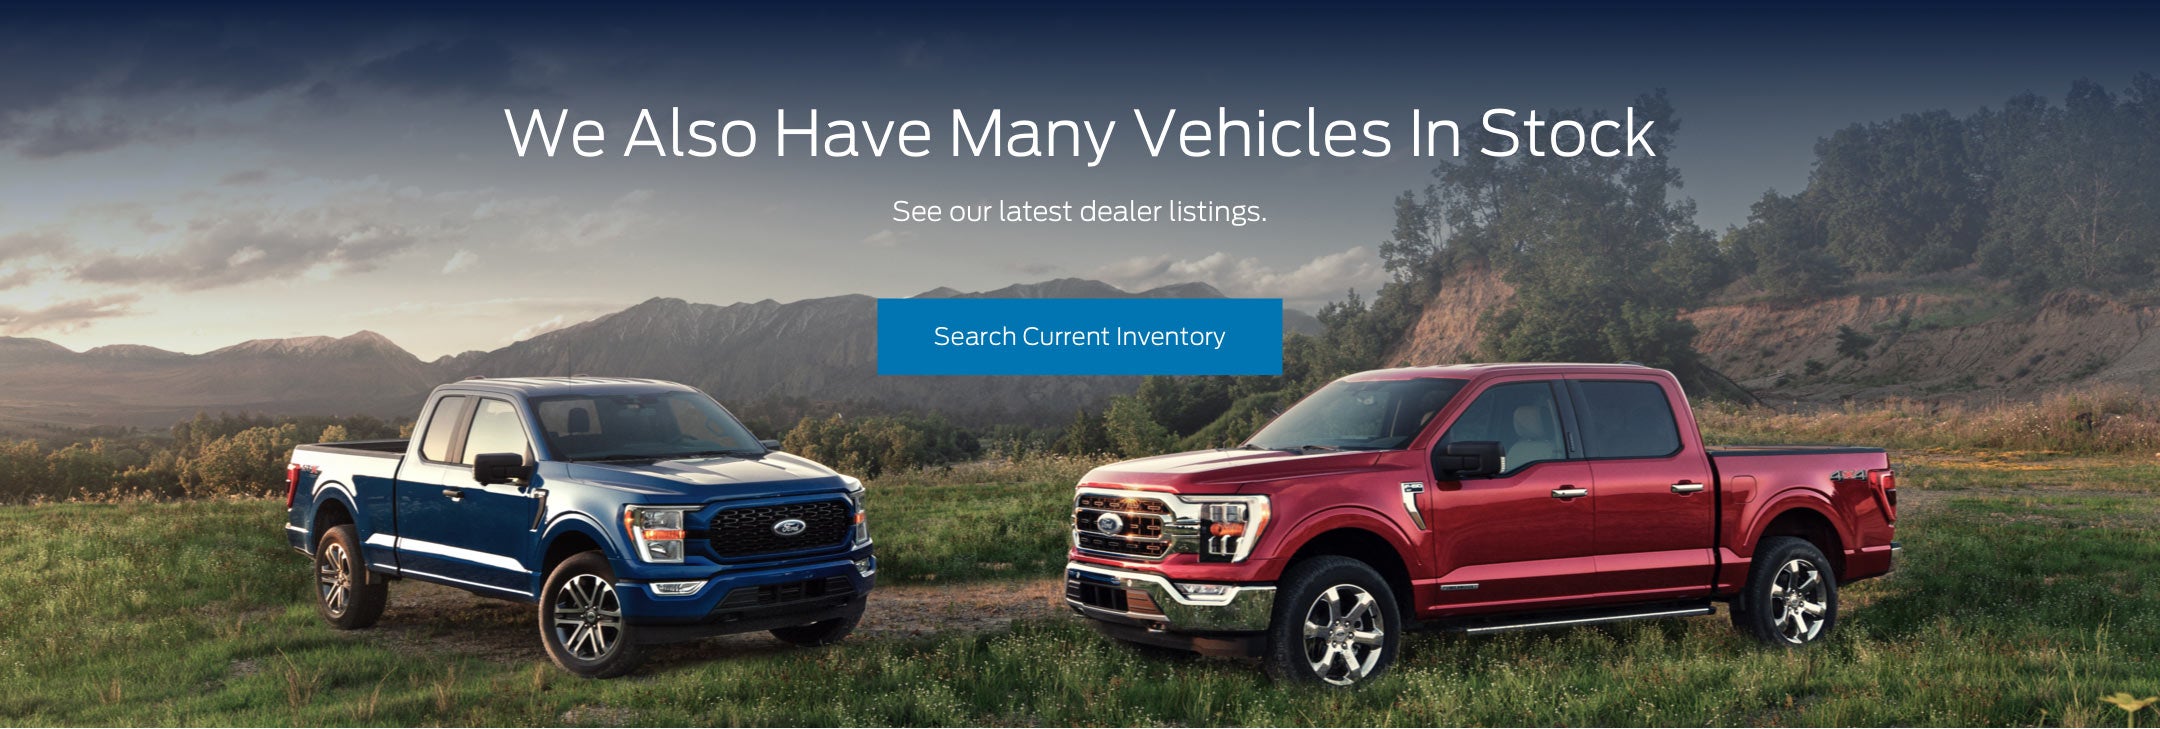 Ford vehicles in stock | Clay Maxey Ford of Berryville in Berryville AR